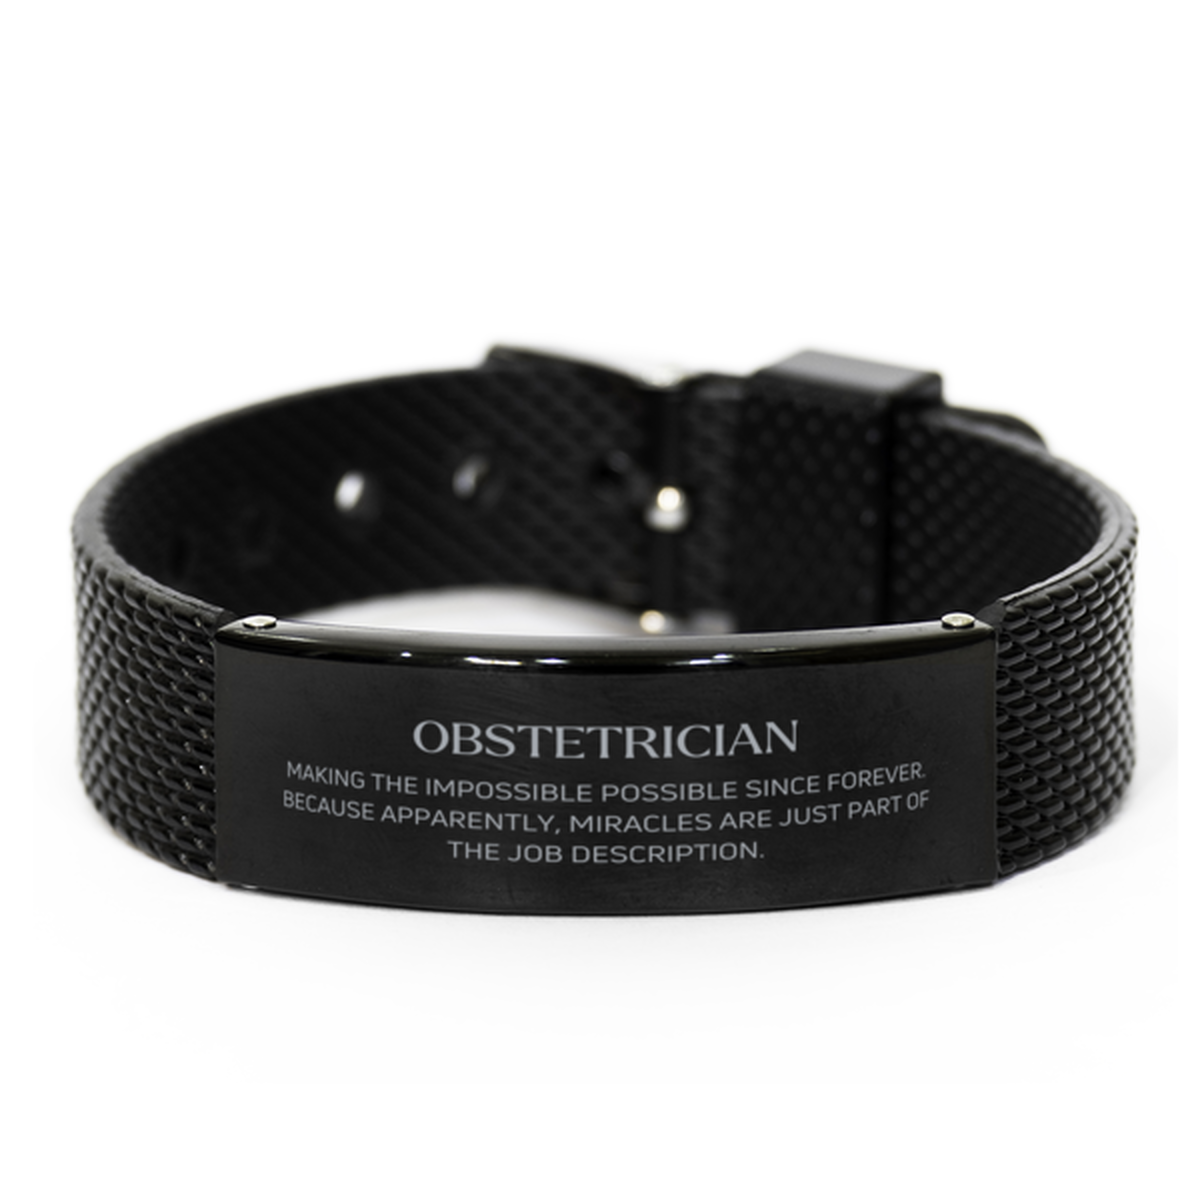 Funny Obstetrician Gifts, Miracles are just part of the job description, Inspirational Birthday Black Shark Mesh Bracelet For Obstetrician, Men, Women, Coworkers, Friends, Boss